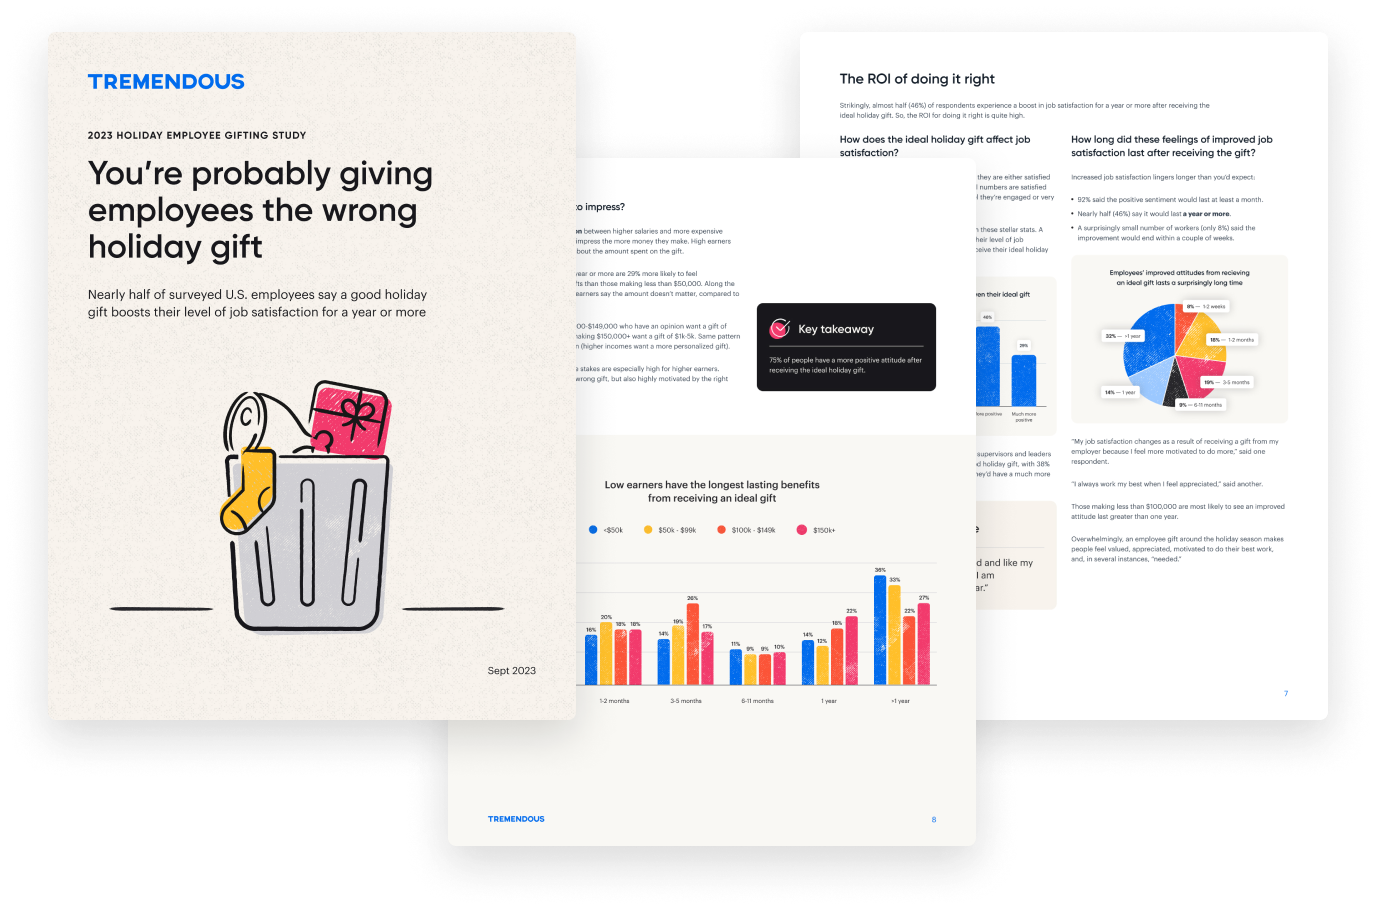 Build a gifting program that employees love